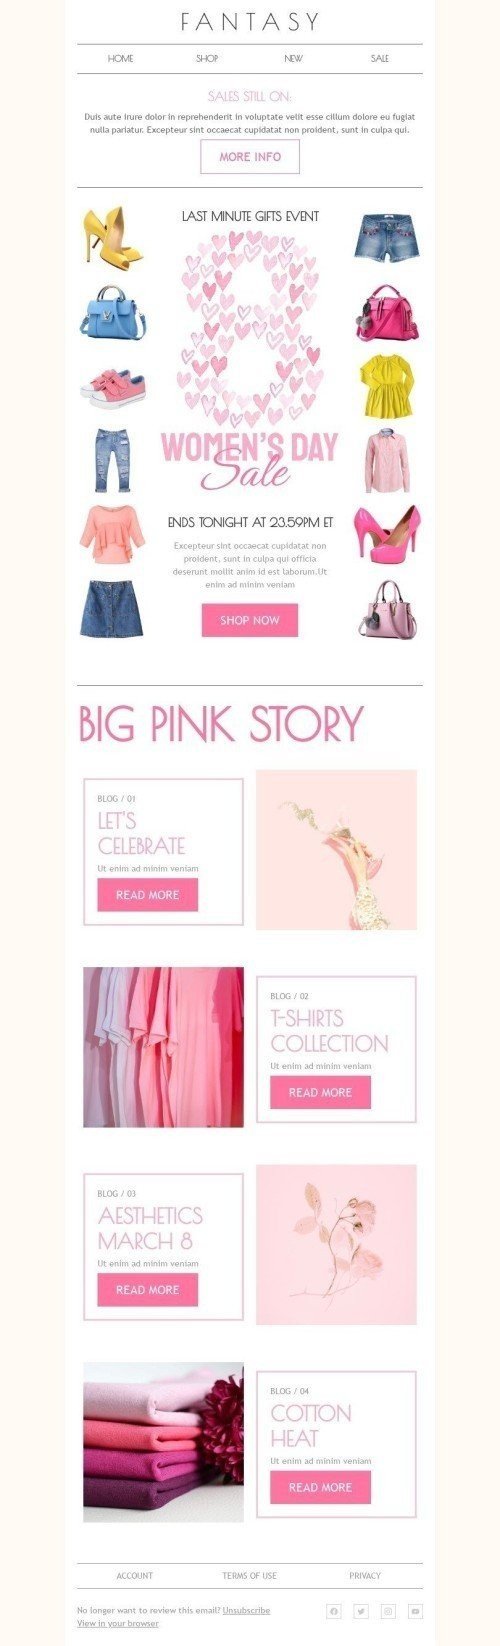 Women's Day Email Template "Big pink story" for Fashion industry desktop view